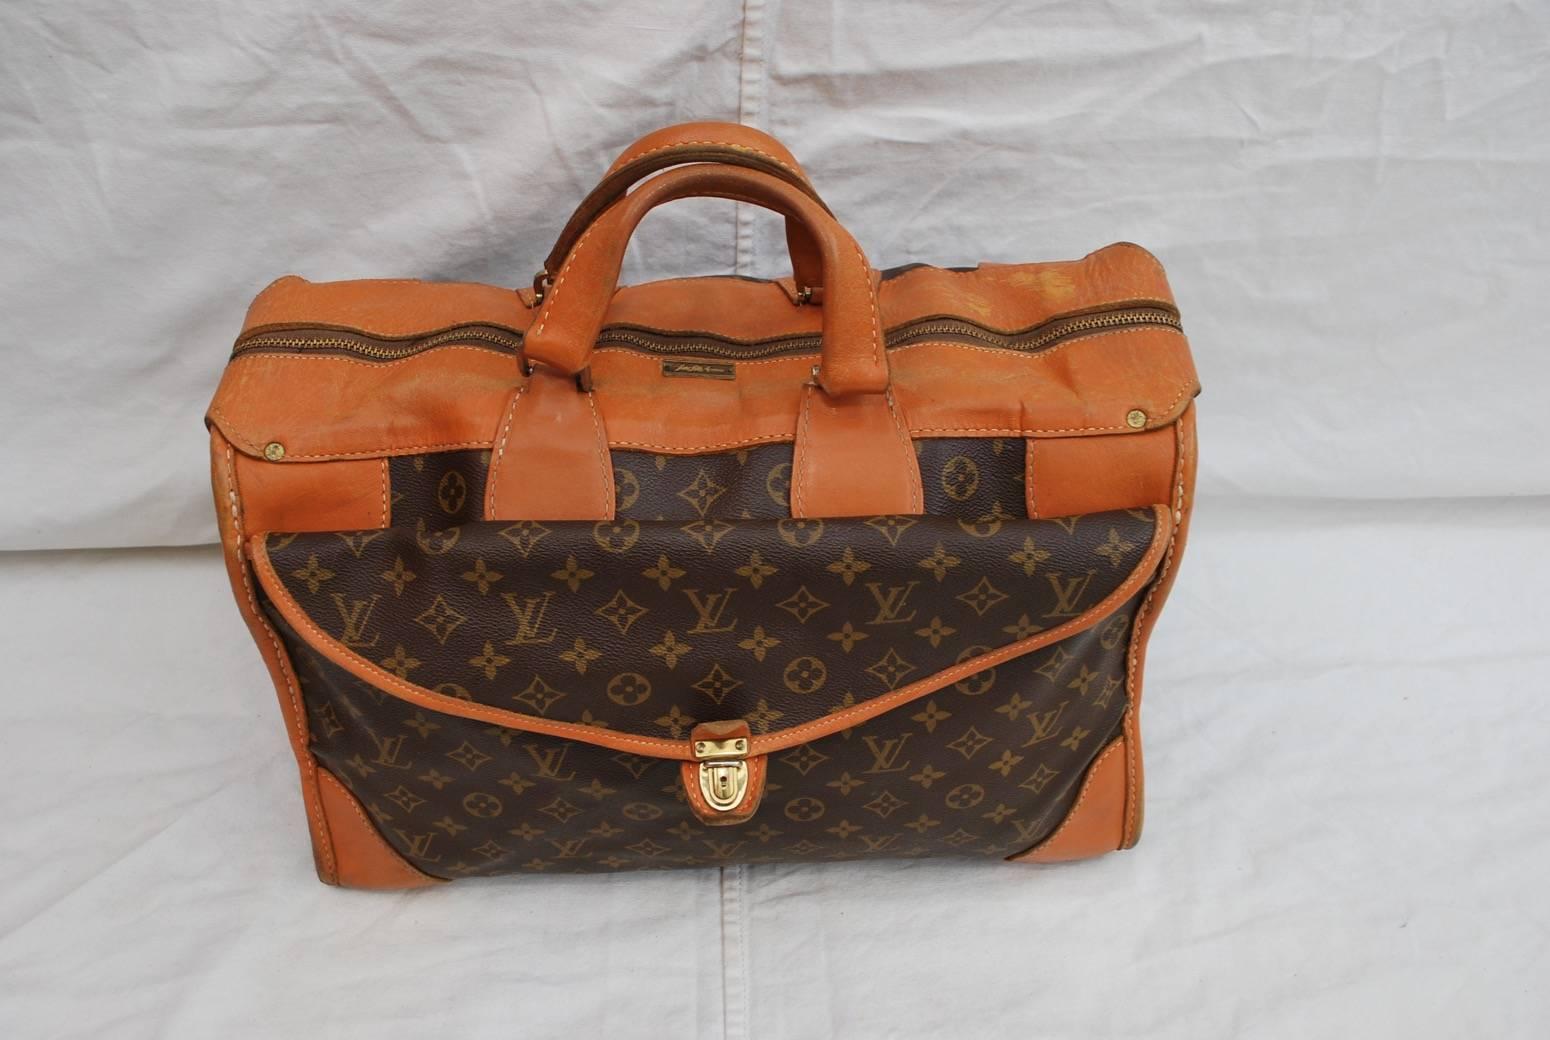 A very nice and elegant 1960s Luis Vuitton travel bag, the patina is really nice, it has some little wears, normal for the age of the bag, but in over all, it is in great condition, no tears, the height is with out the handles.